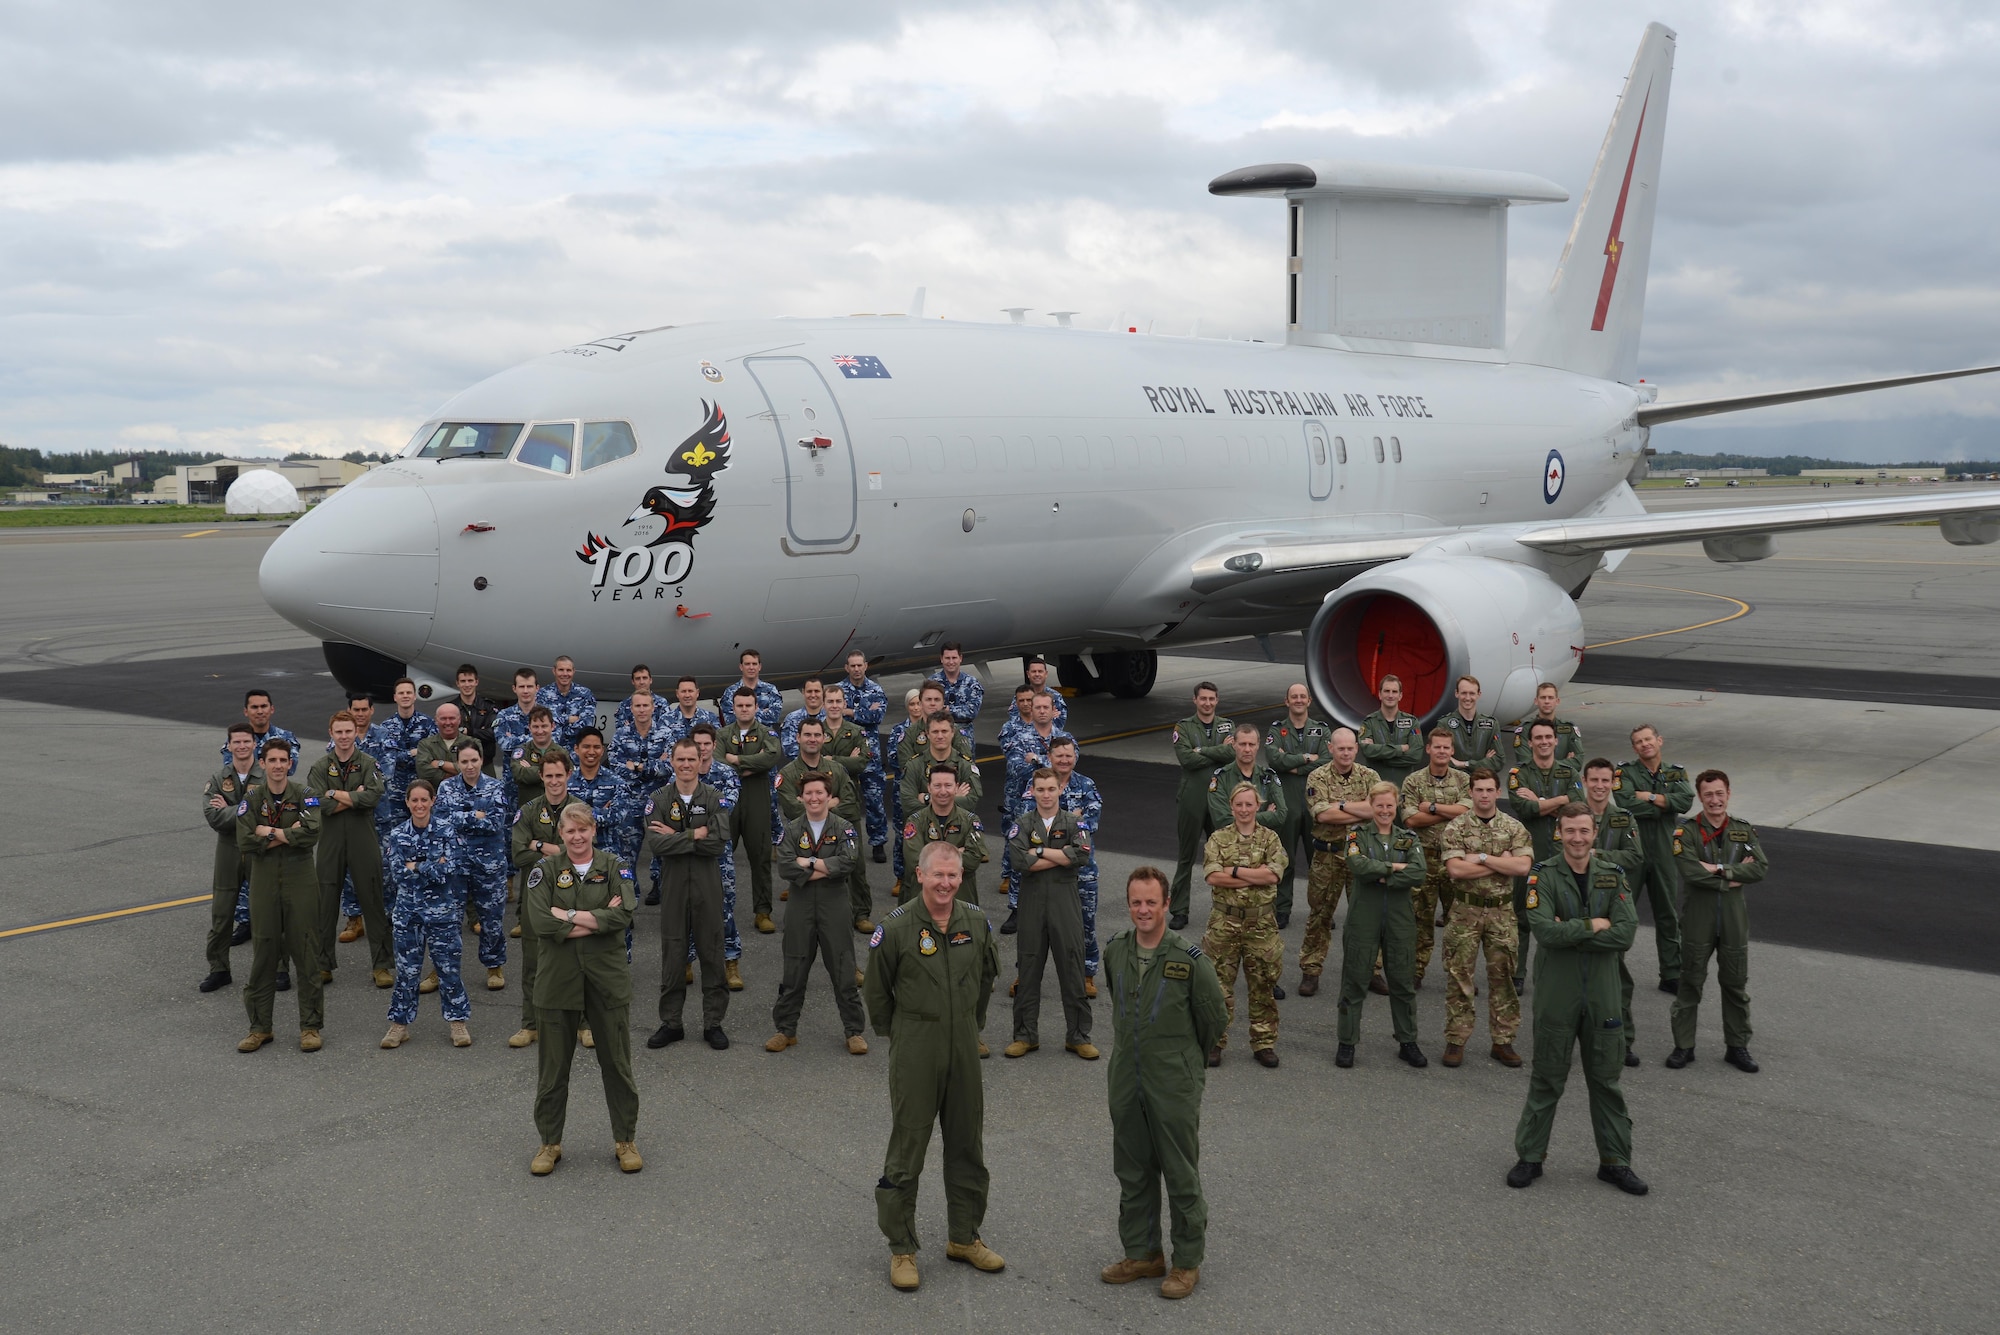 The 2nd Squadron, Royal Australian Air Force and 47th Squadron, Royal Air Force celebrate each other’s centenary during Red Flag 16-3 at Joint Base Elmendorf-Richardson, Alaska, Aug. 19, 2016. They posed in front of an E-7A Wedgetail, one of Australia’s most advanced air battlespace aircraft. Red Flag enables joint and international units to train together to improve their combat skills in a controlled environment. (U.S. Air Force photo by Airman 1st Class Christopher R. Morales)